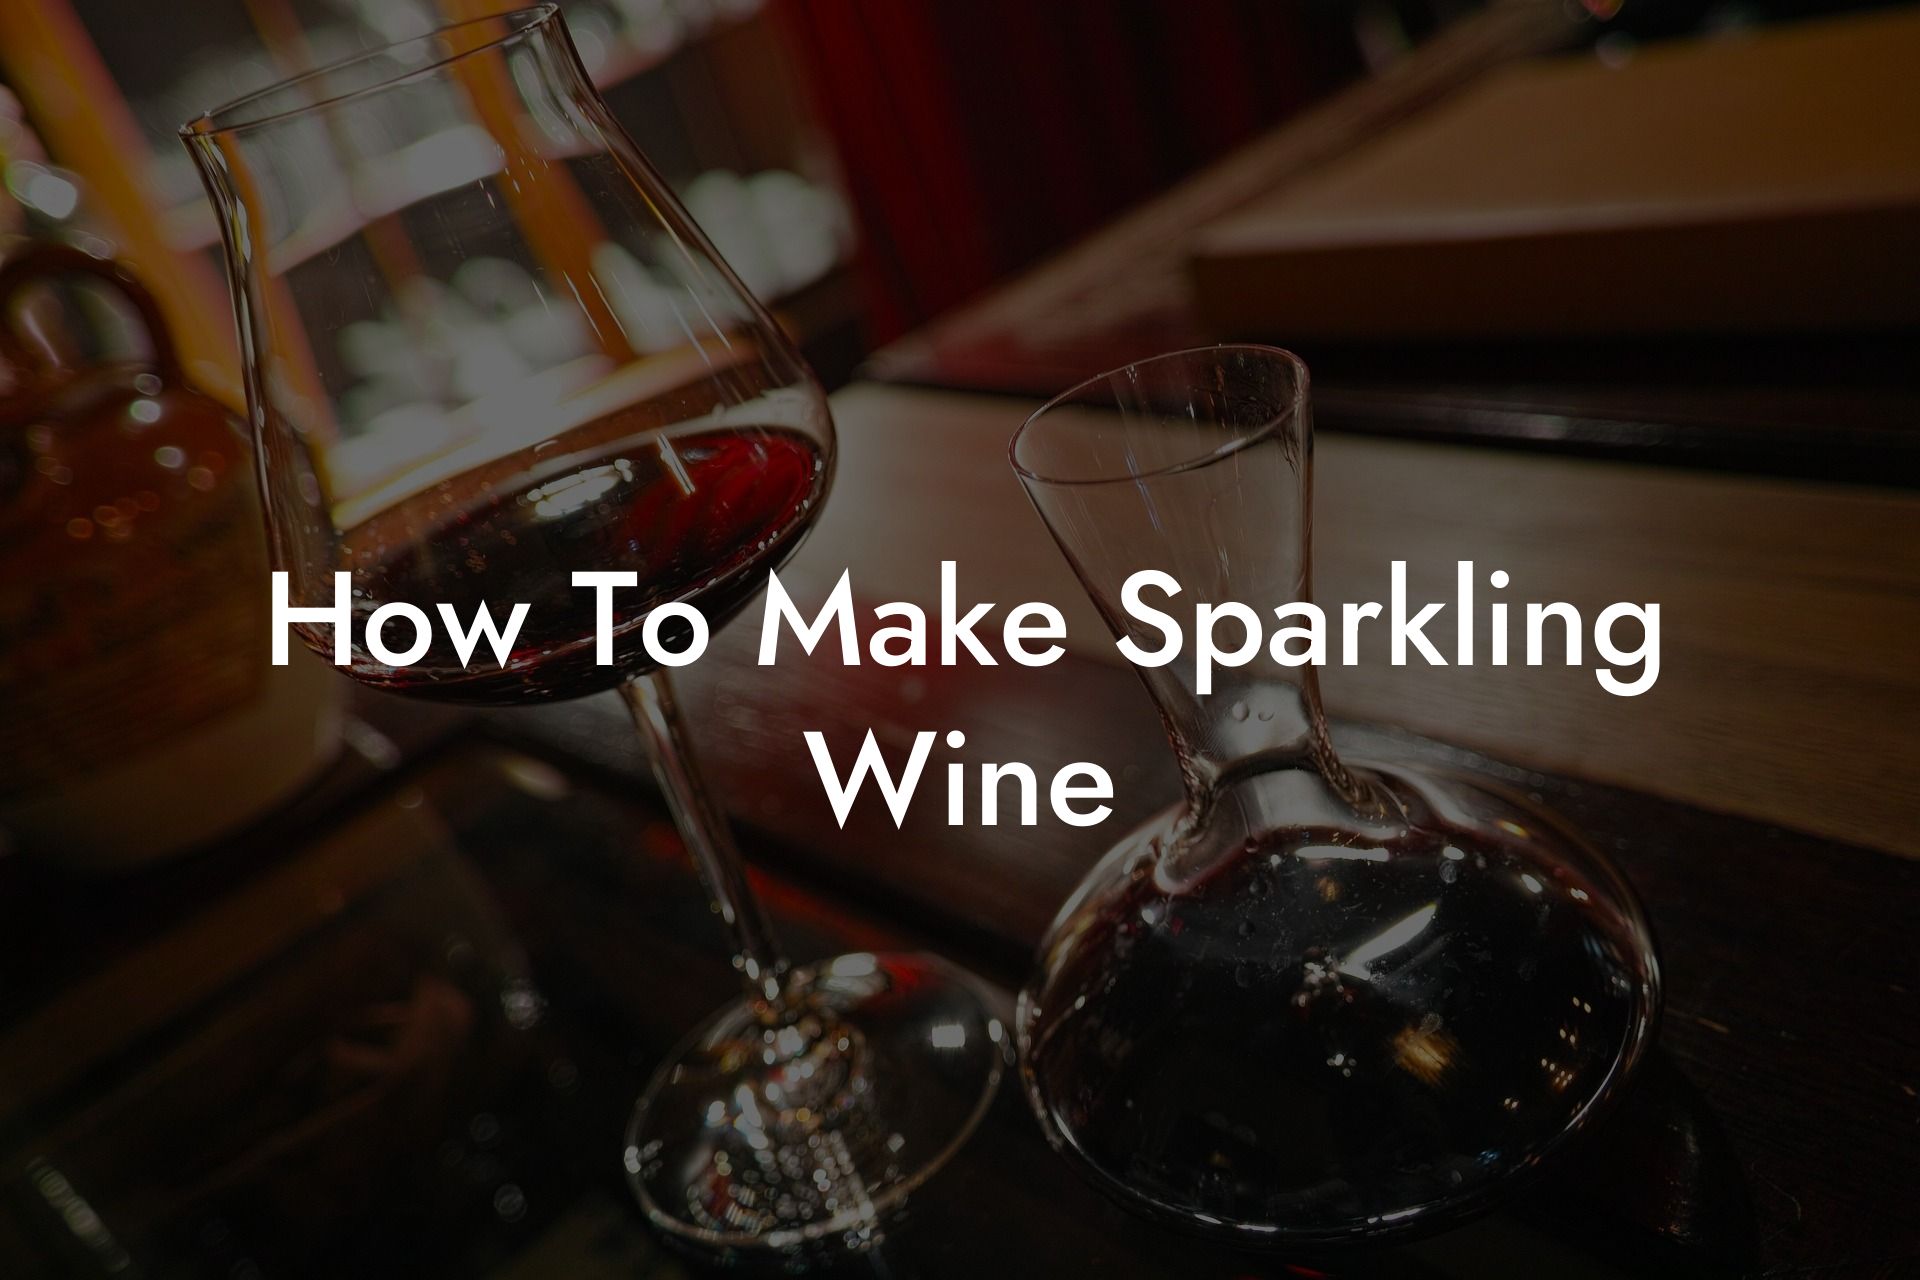 How To Make Sparkling Wine